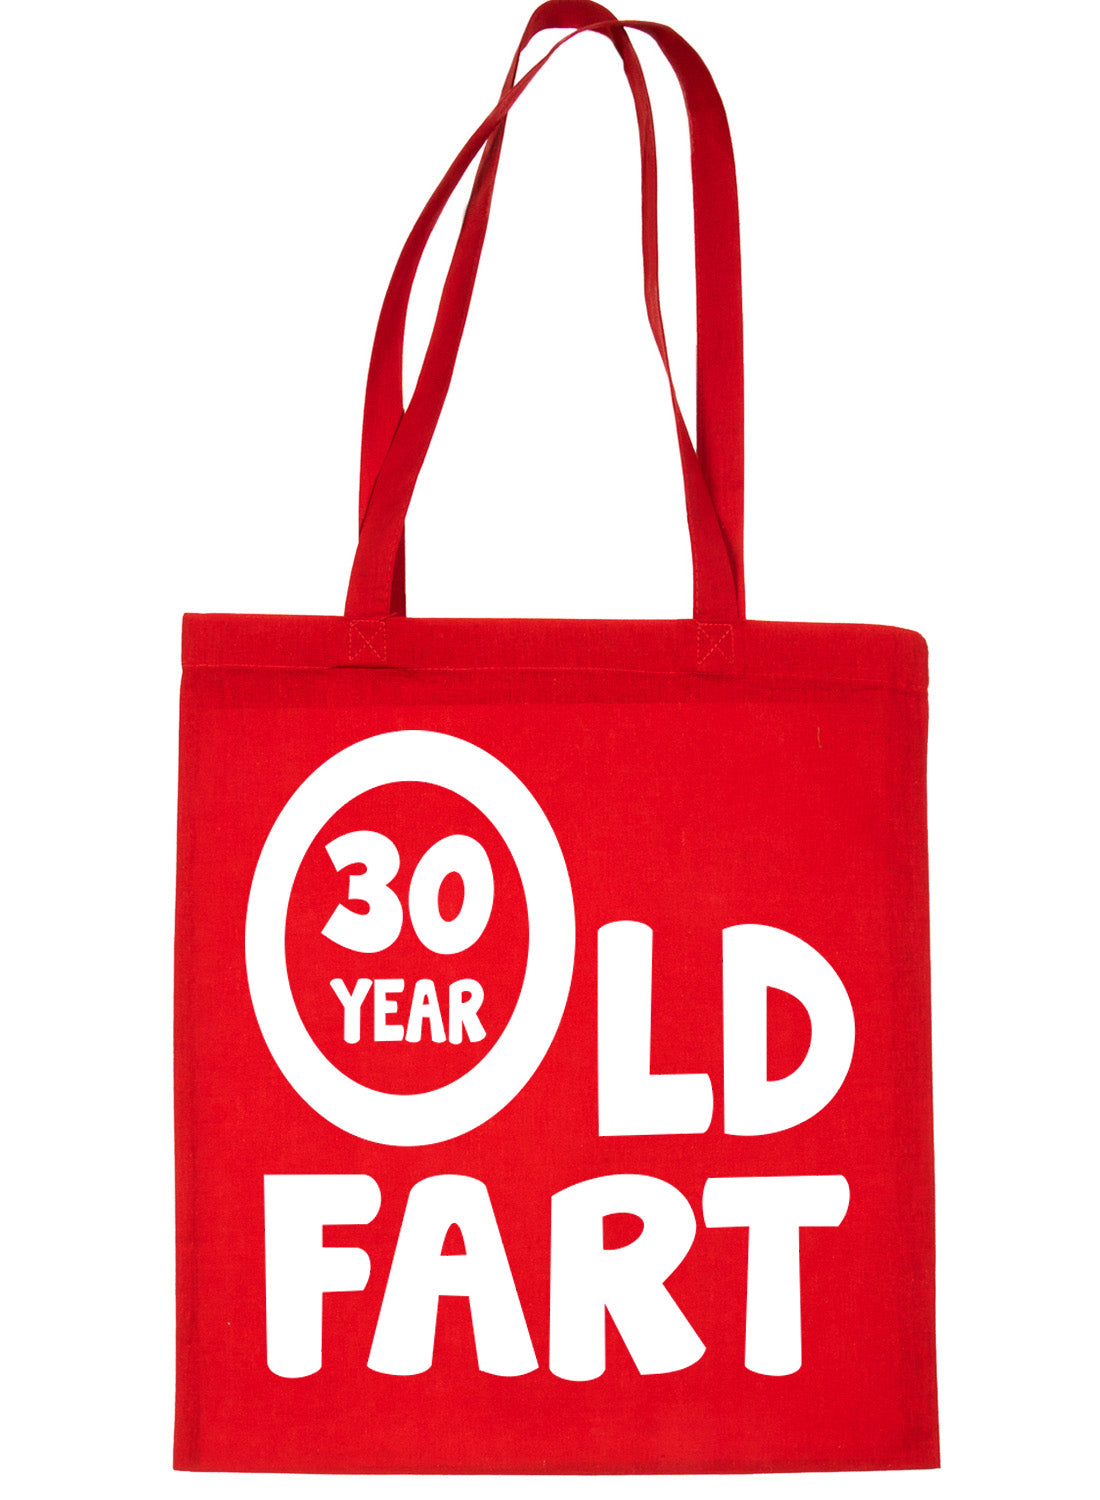 30 Year Old Fart Birthday Funny Shopping Tote Bag Ladies Gift